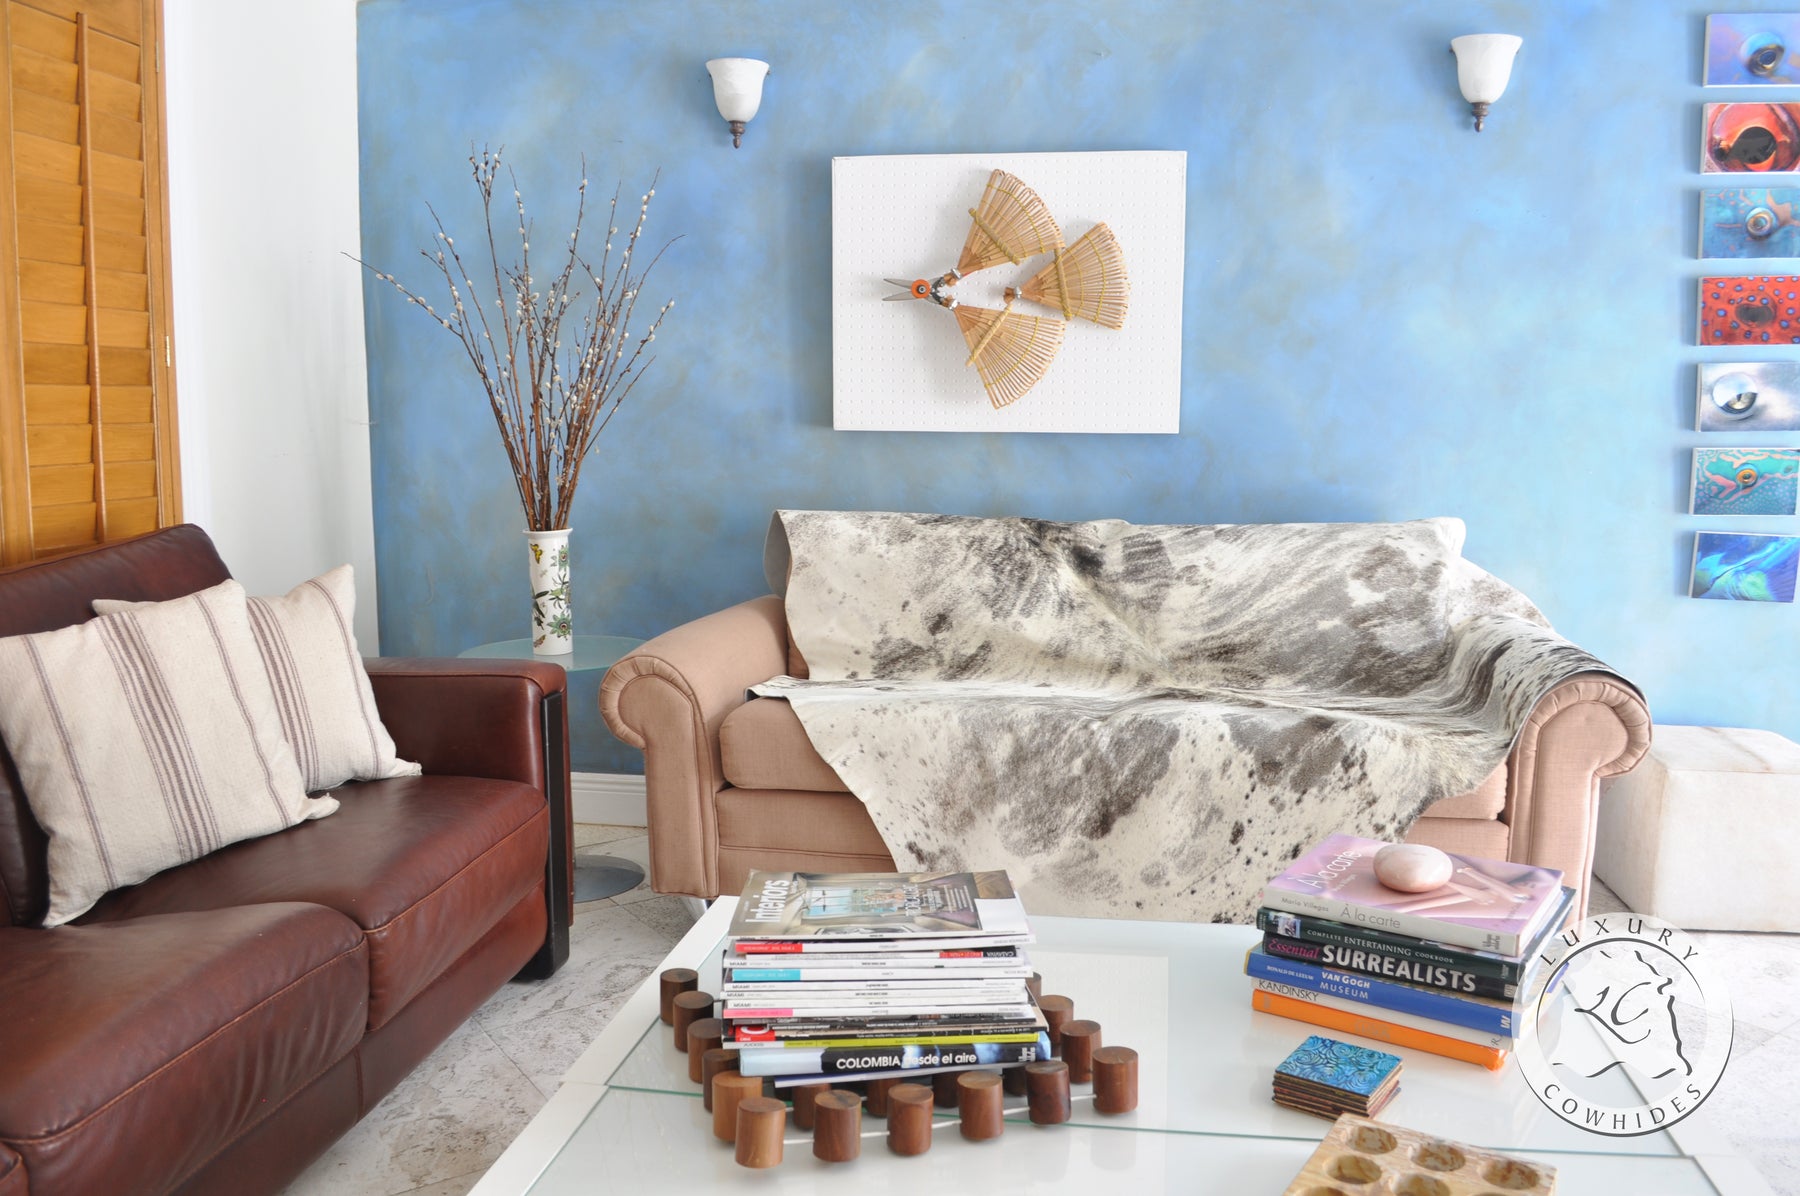 The Cowhide Rug adds Character and Utility to your Room